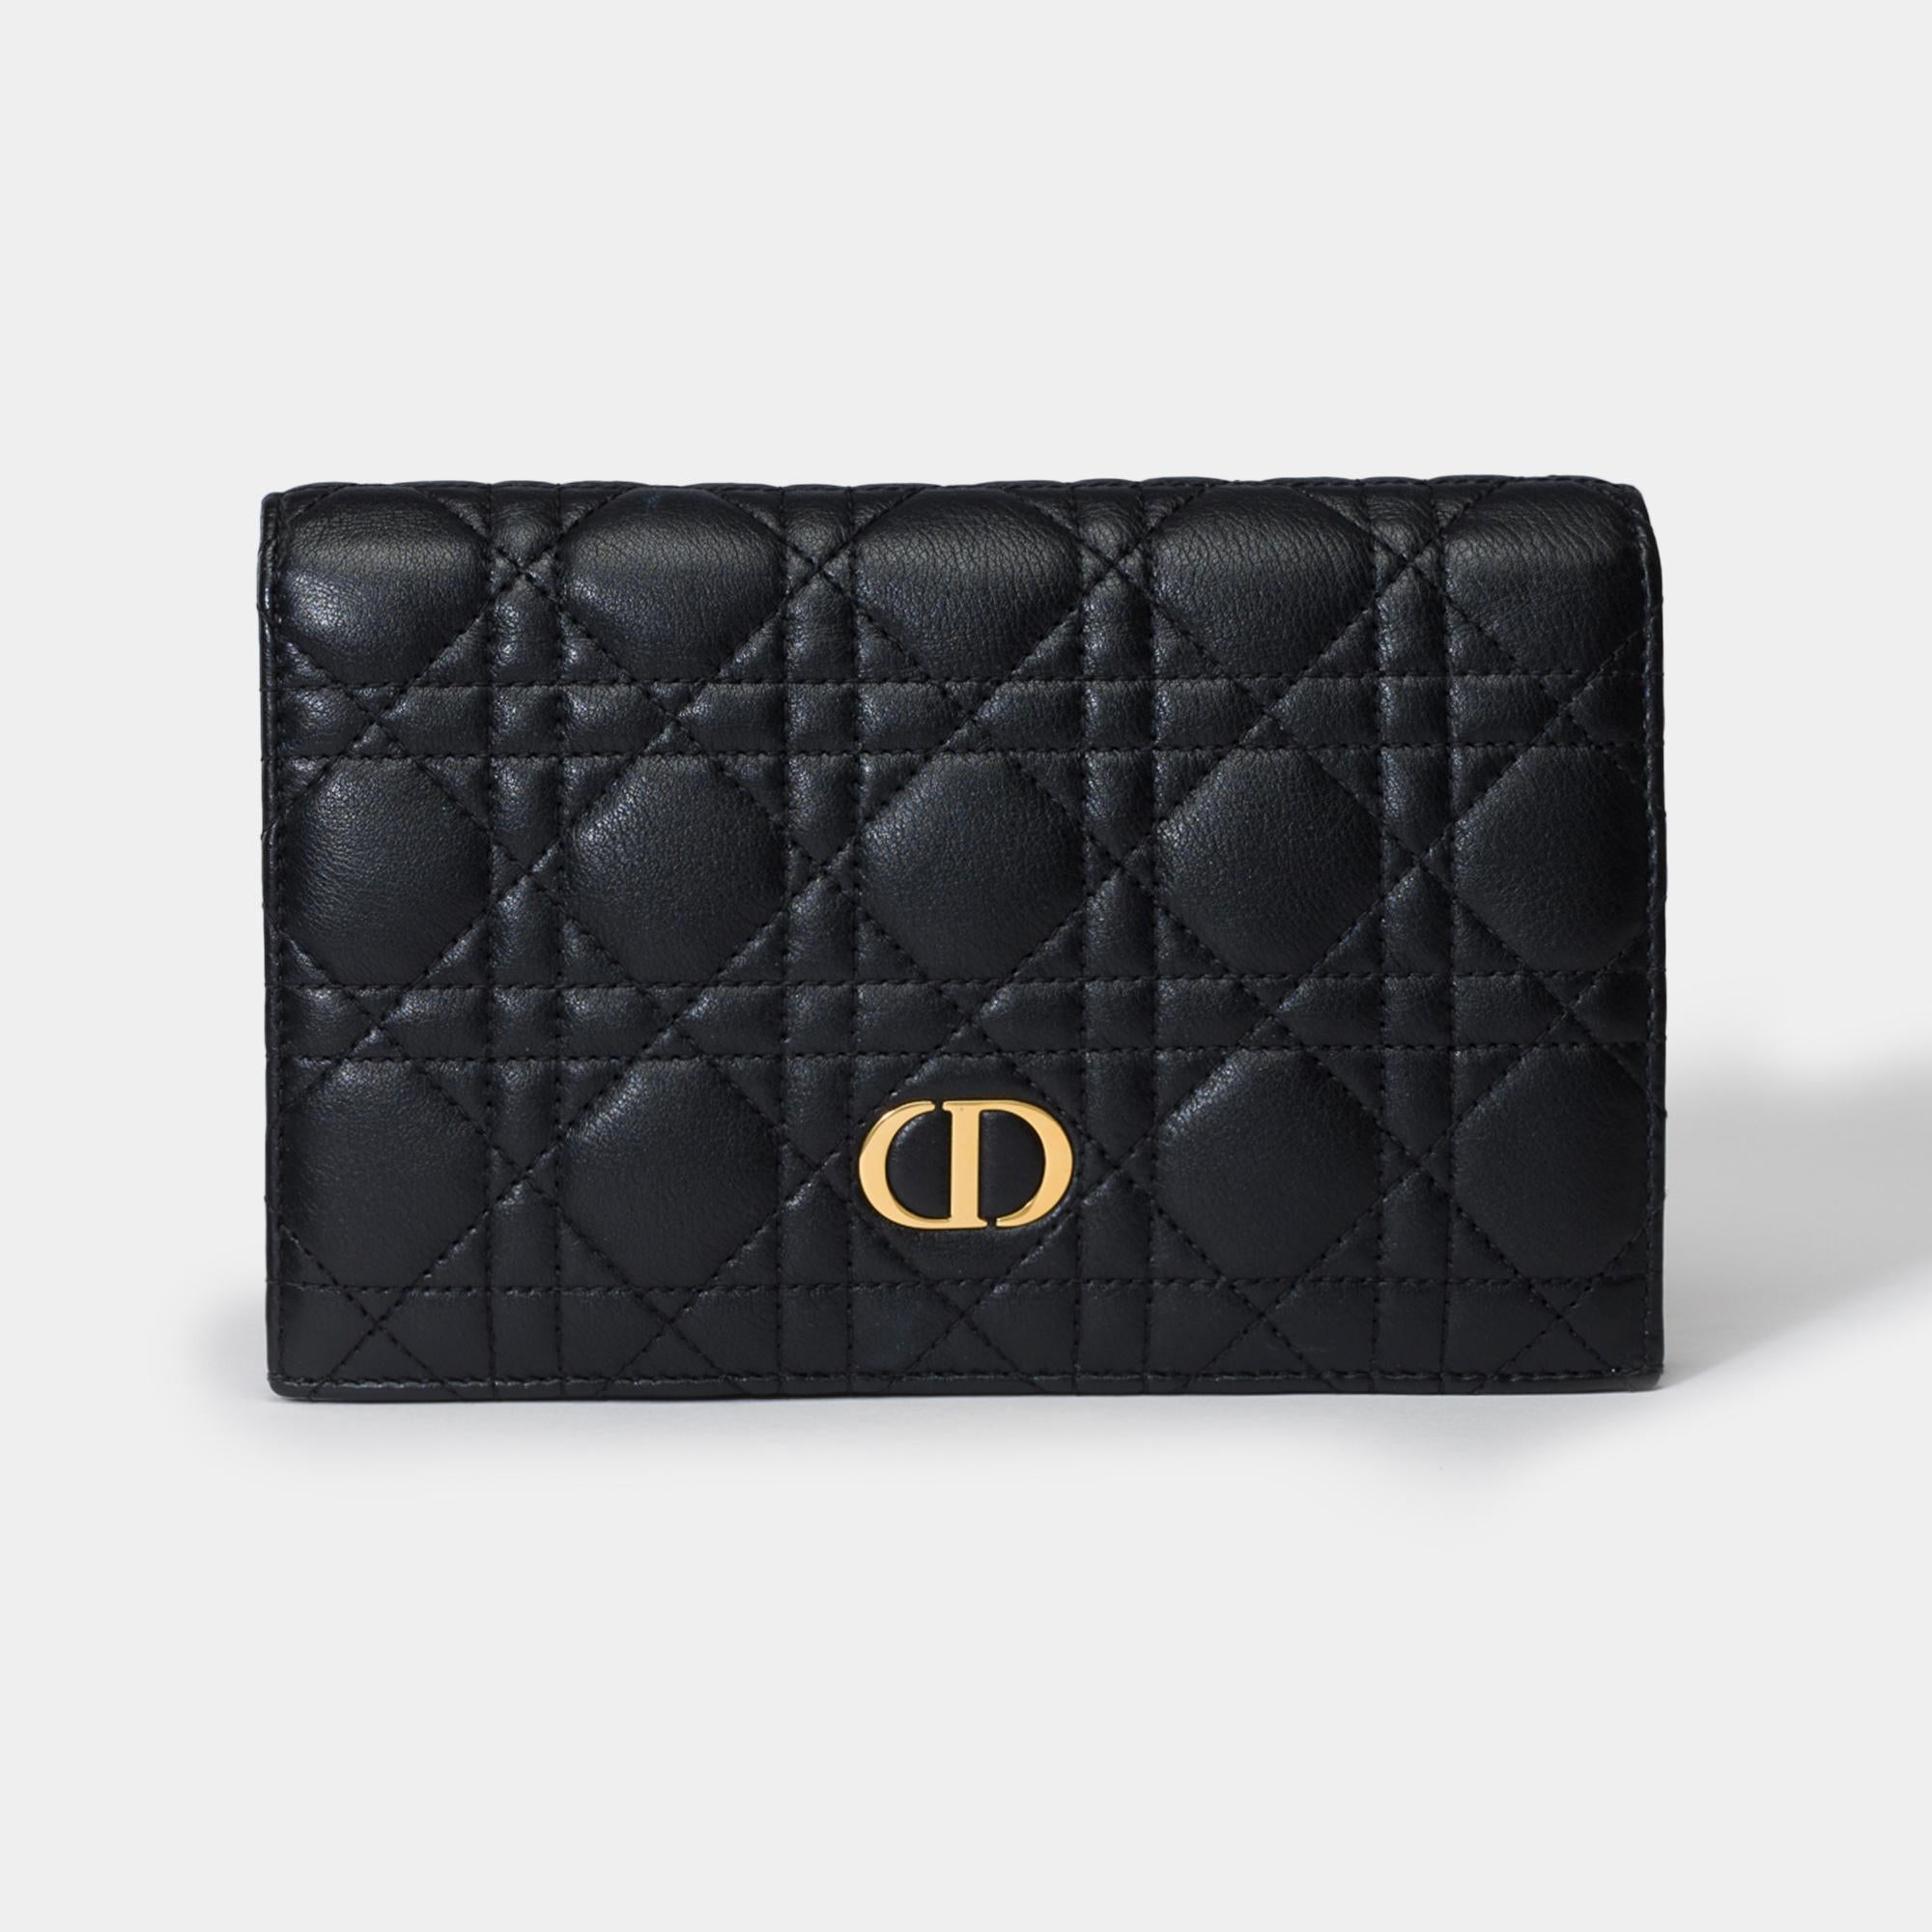 The​ ​Dior​ ​Caro​ ​long​ ​wallet​ ​delivers​ ​a​ ​contemporary​ ​version​ ​of​ ​the​ ​iconic​ ​Cannage​ ​stitching.​ ​Crafted​ ​in​ ​black​ ​calf​ ​leather,​ ​it​ ​features​ ​a​ ​flap​ ​enhanced​ ​by​ ​a​ ​CD​ ​signature​ ​on​ ​the​ ​front.​ ​Chic​